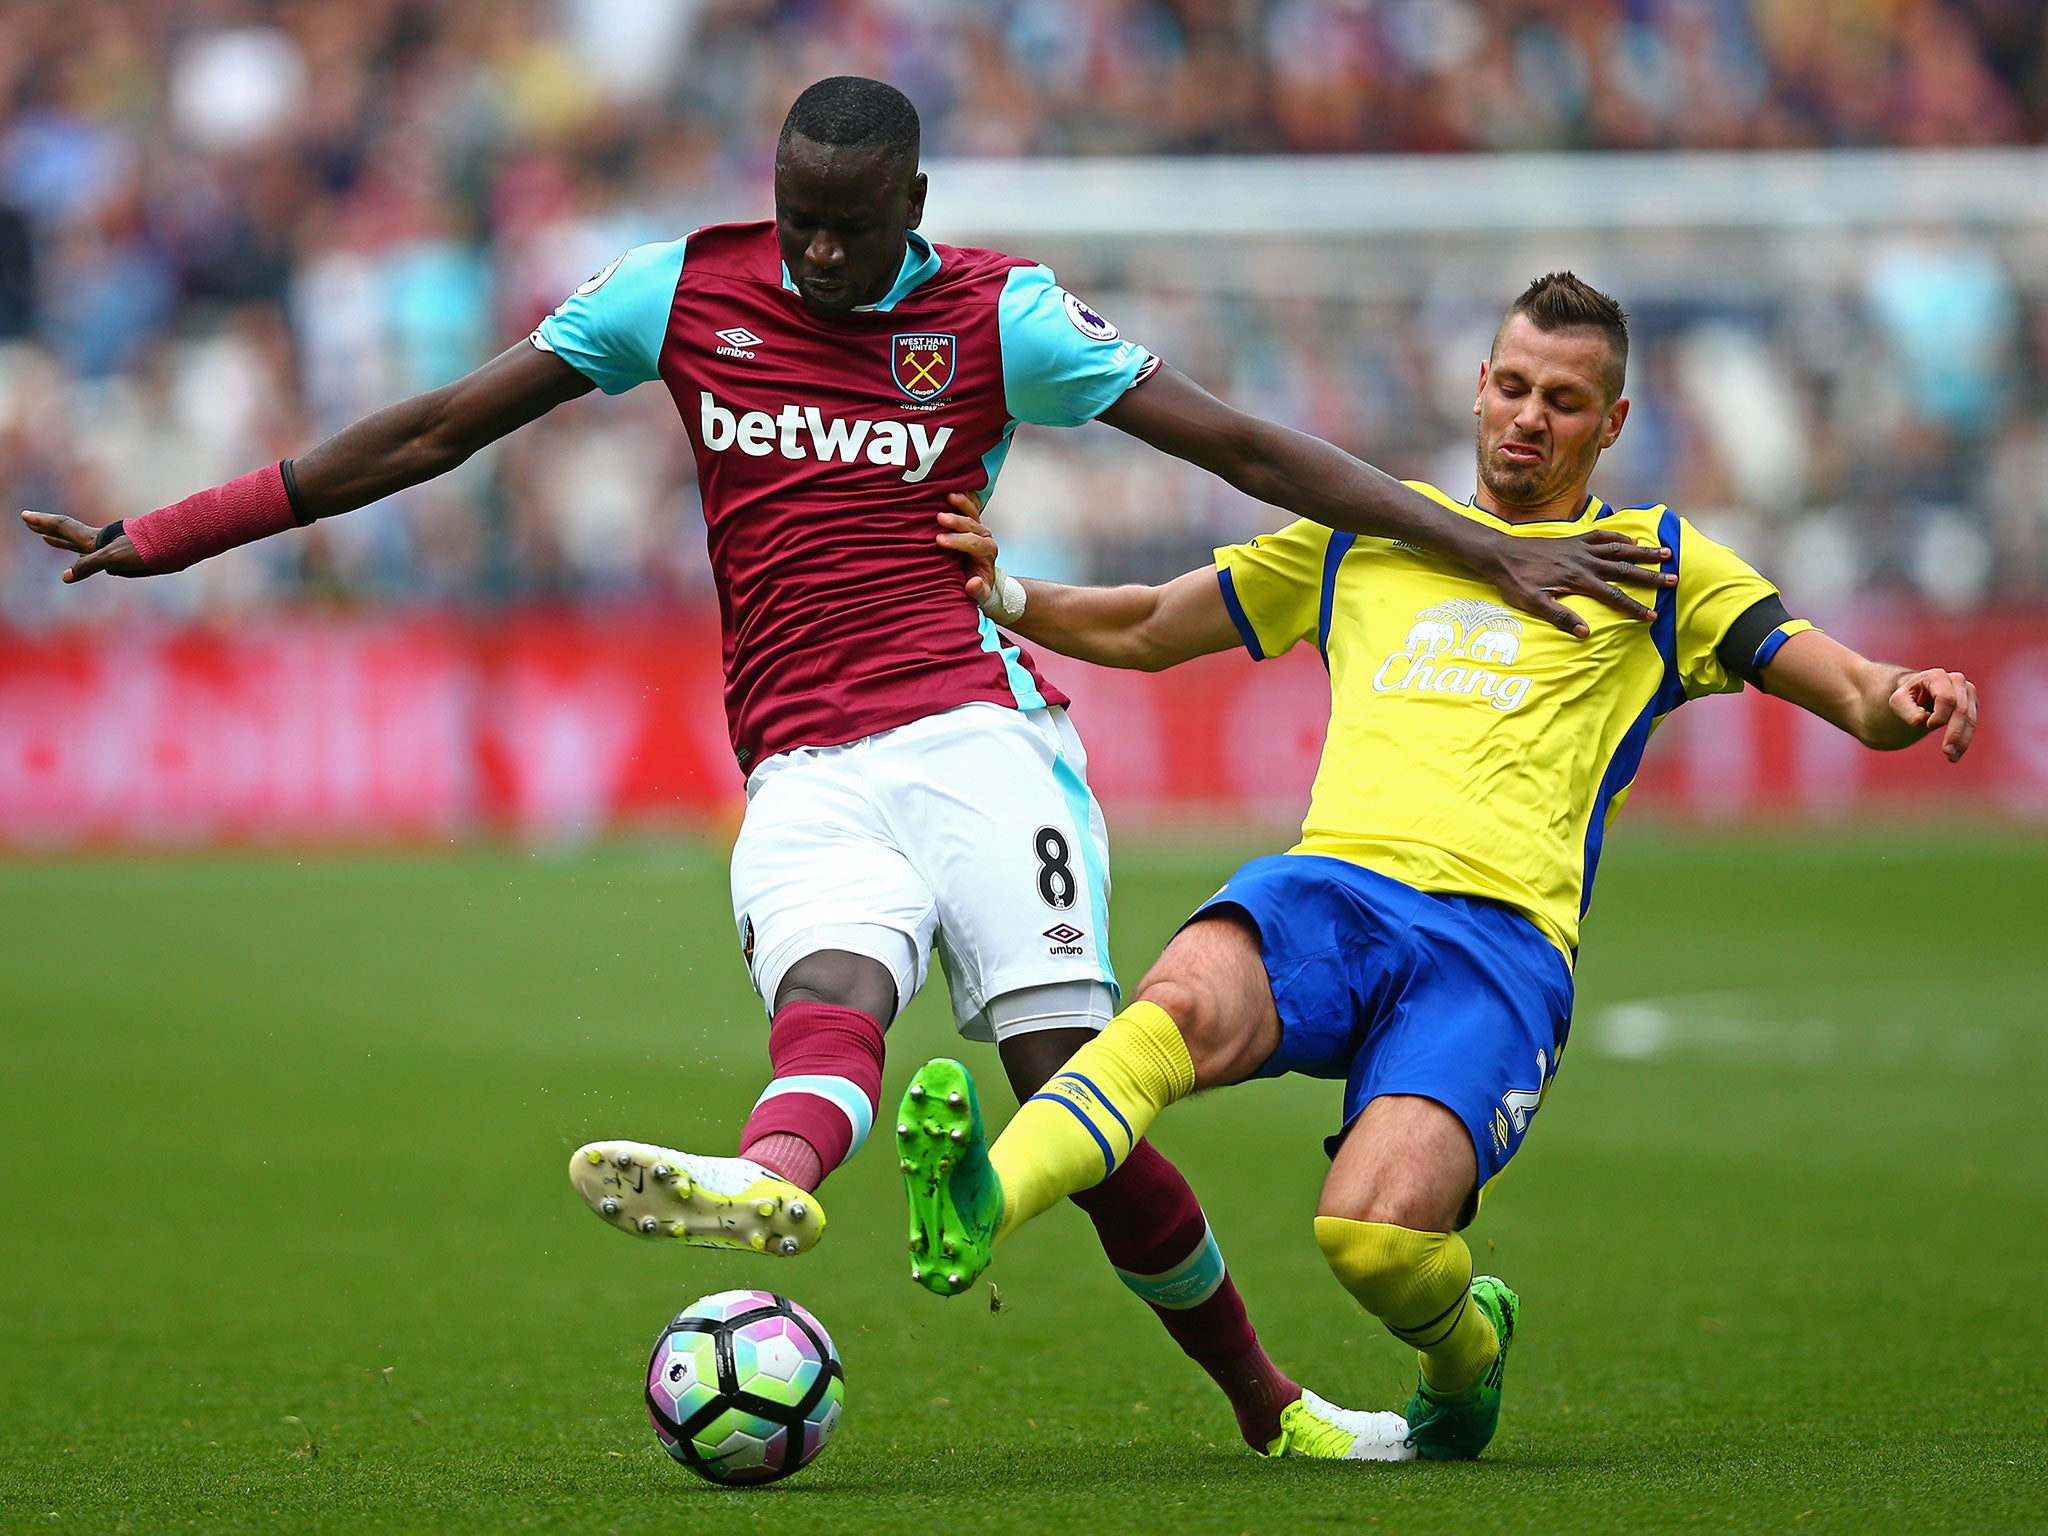 West Ham and Everton go head to head at the London Stadium